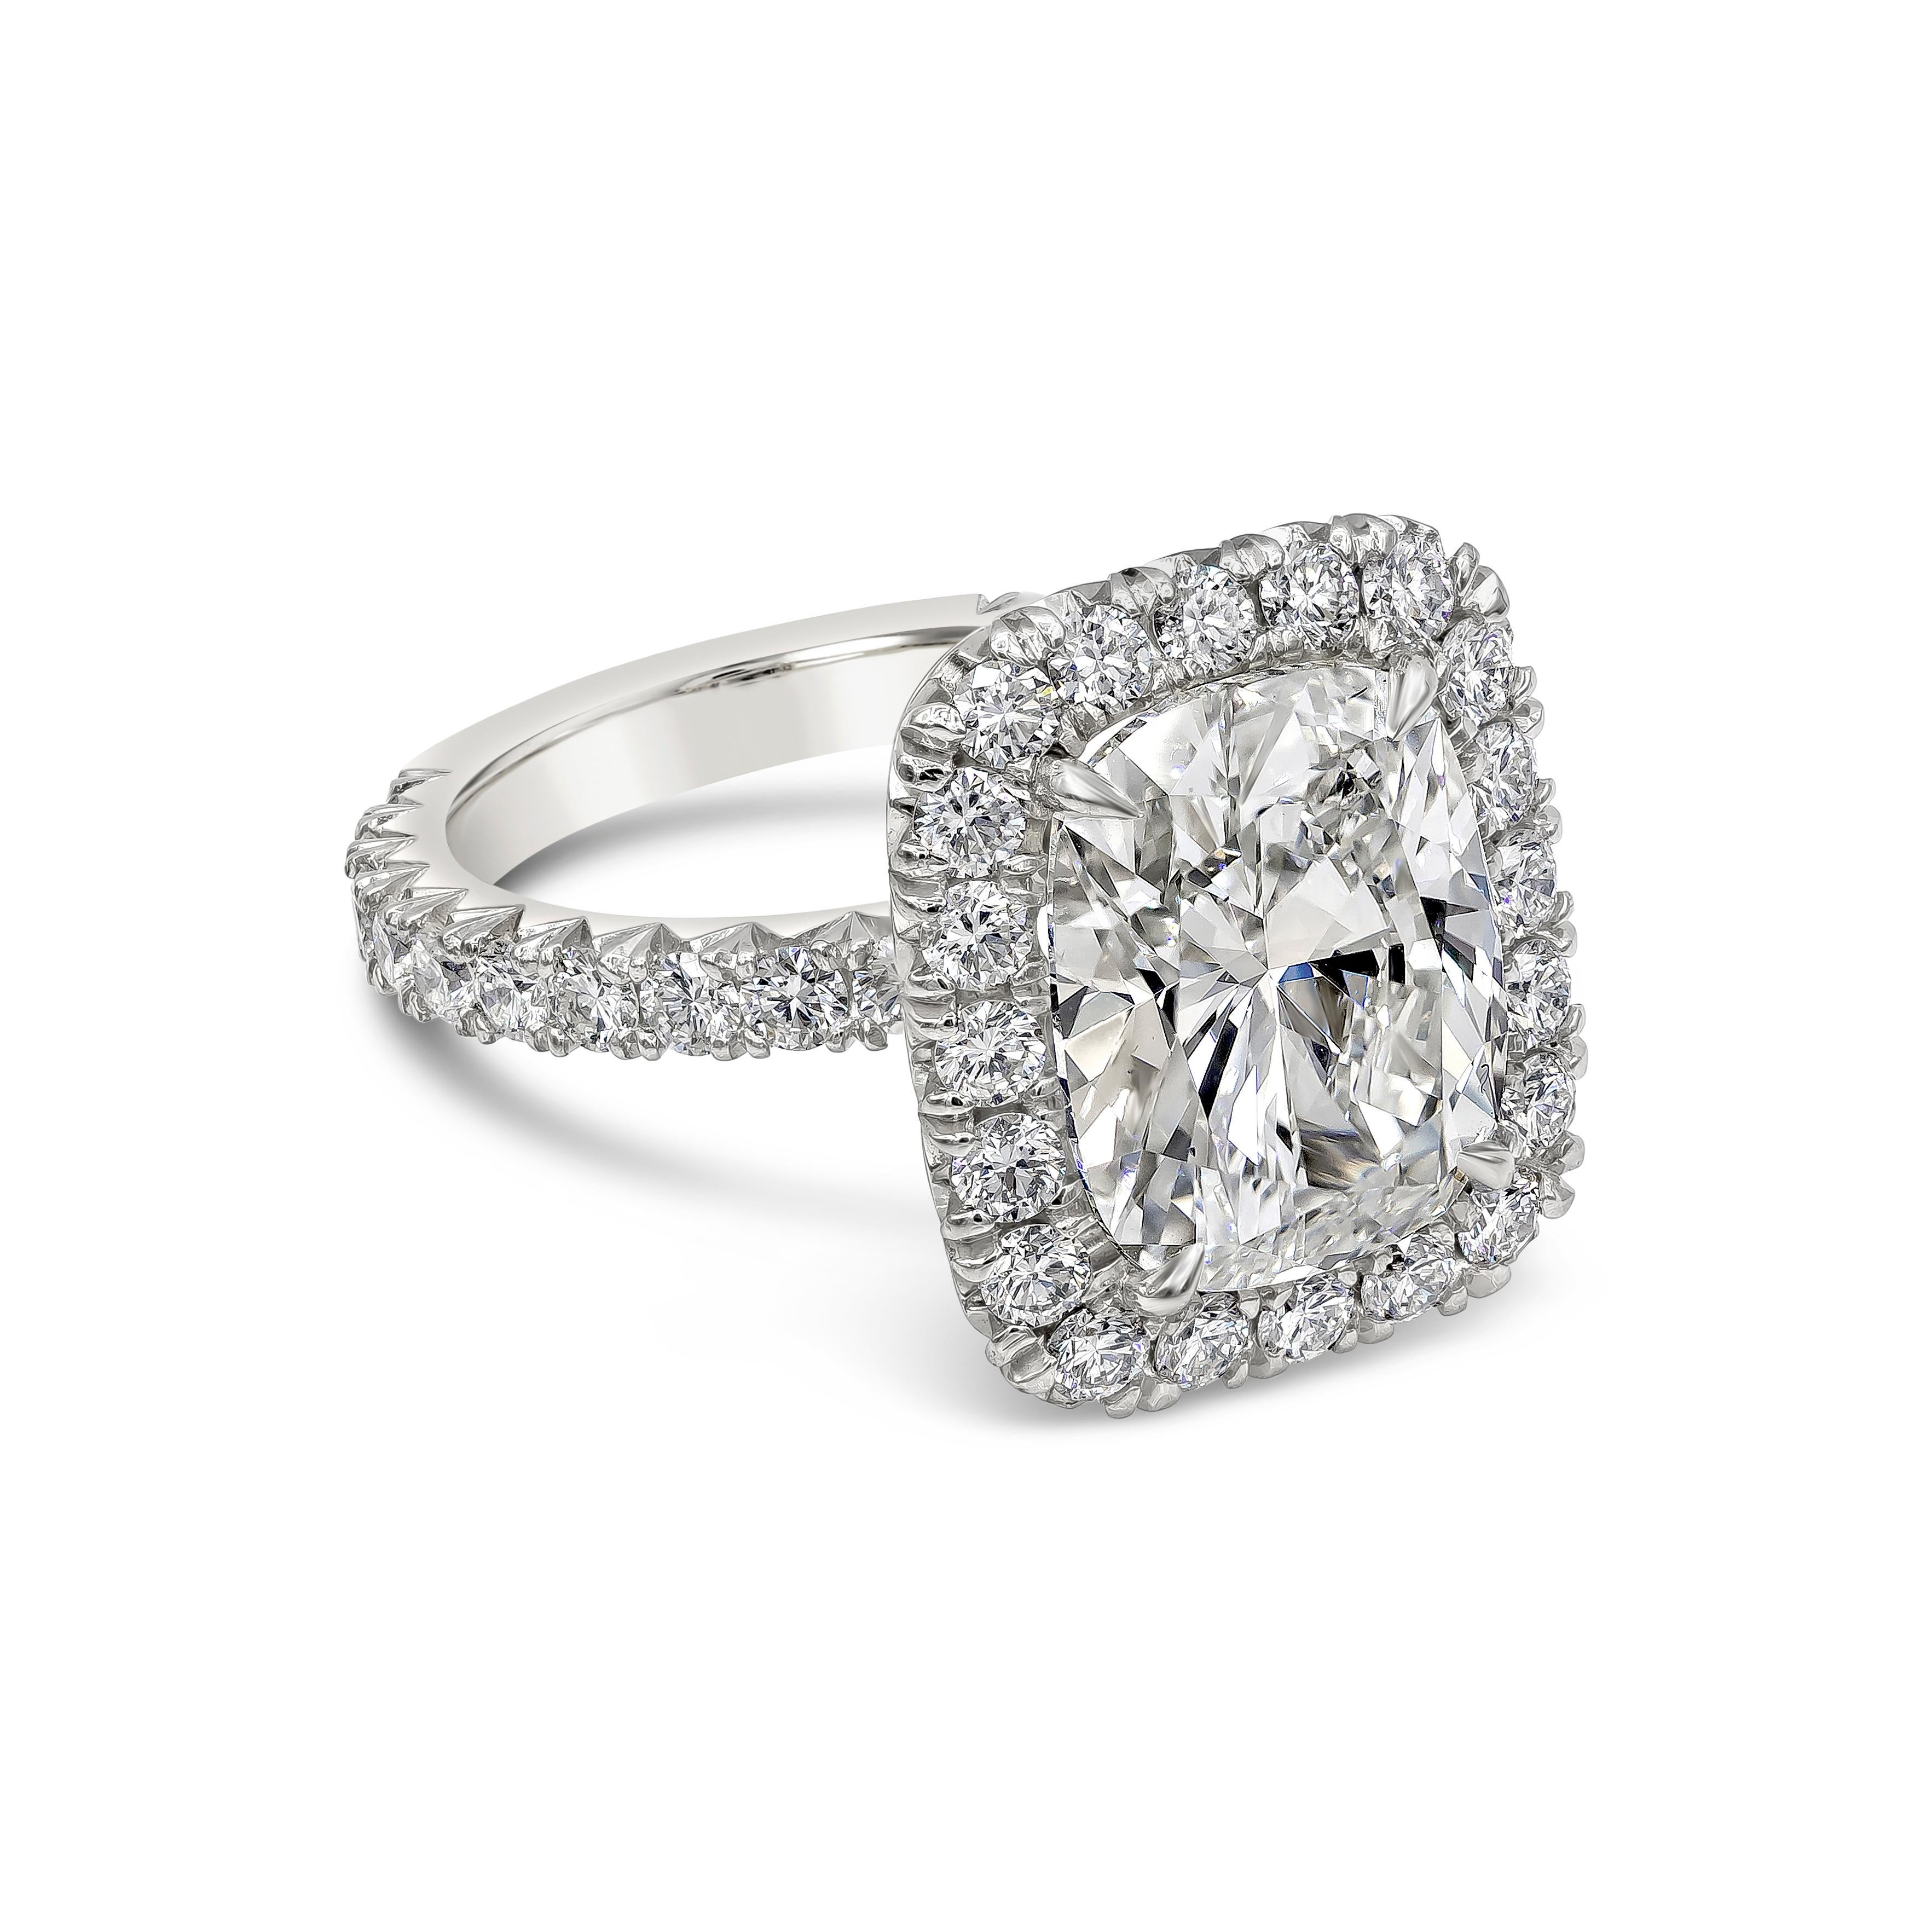 A classic engagement ring style showcasing a 5.01 carats cushion cut diamond, GIA Certified as J Color and VS2 in clarity. The center stone is surrounded by a single row of halo round brilliant diamonds and the shank is diamond encrusted. Accent